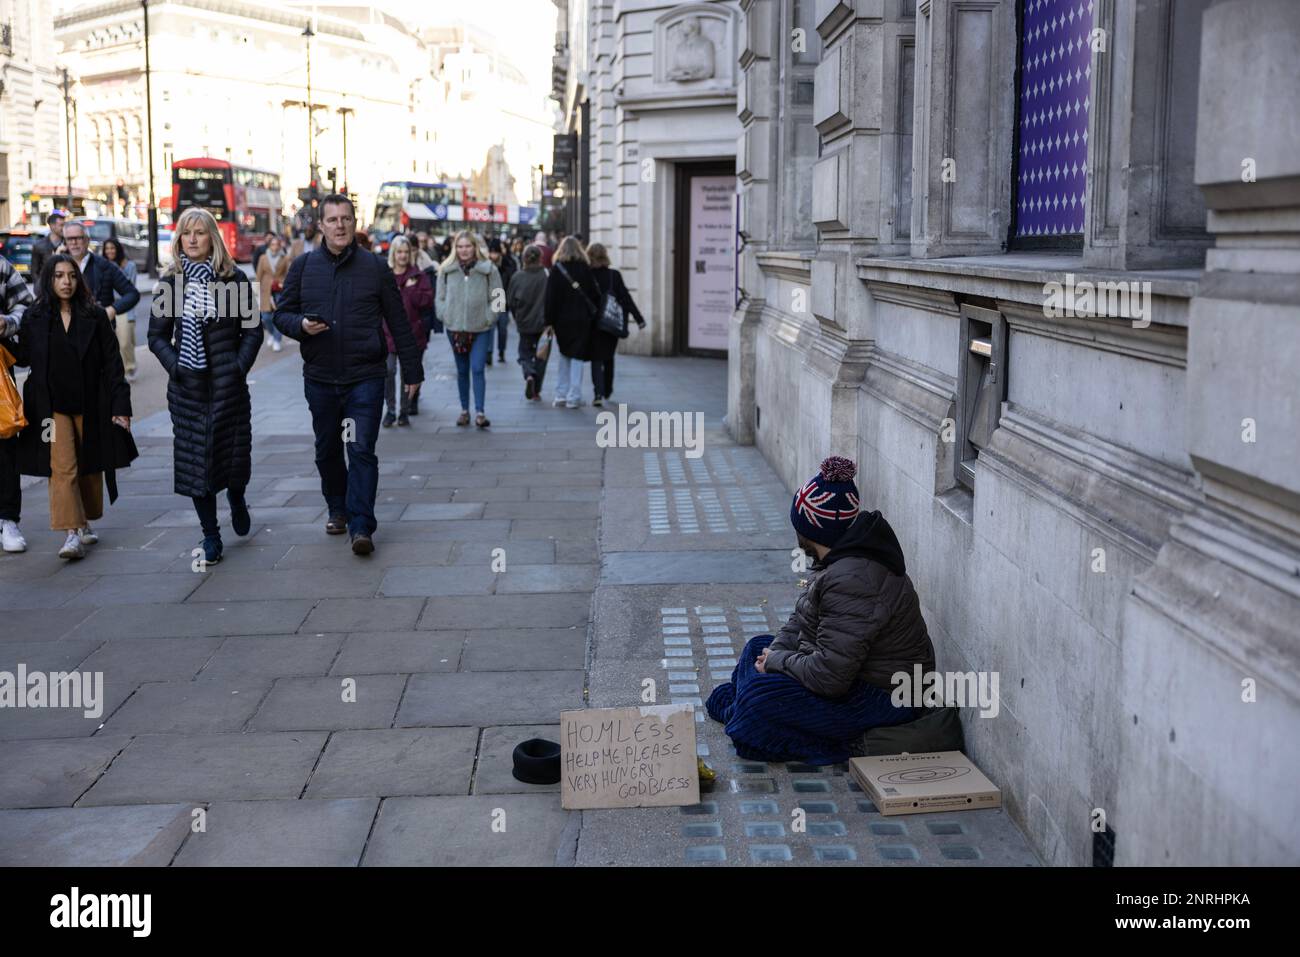 A Homeless man sits on the pavement with a sign asking for help with food or money, Piccadilly, London, England, UK Stock Photo